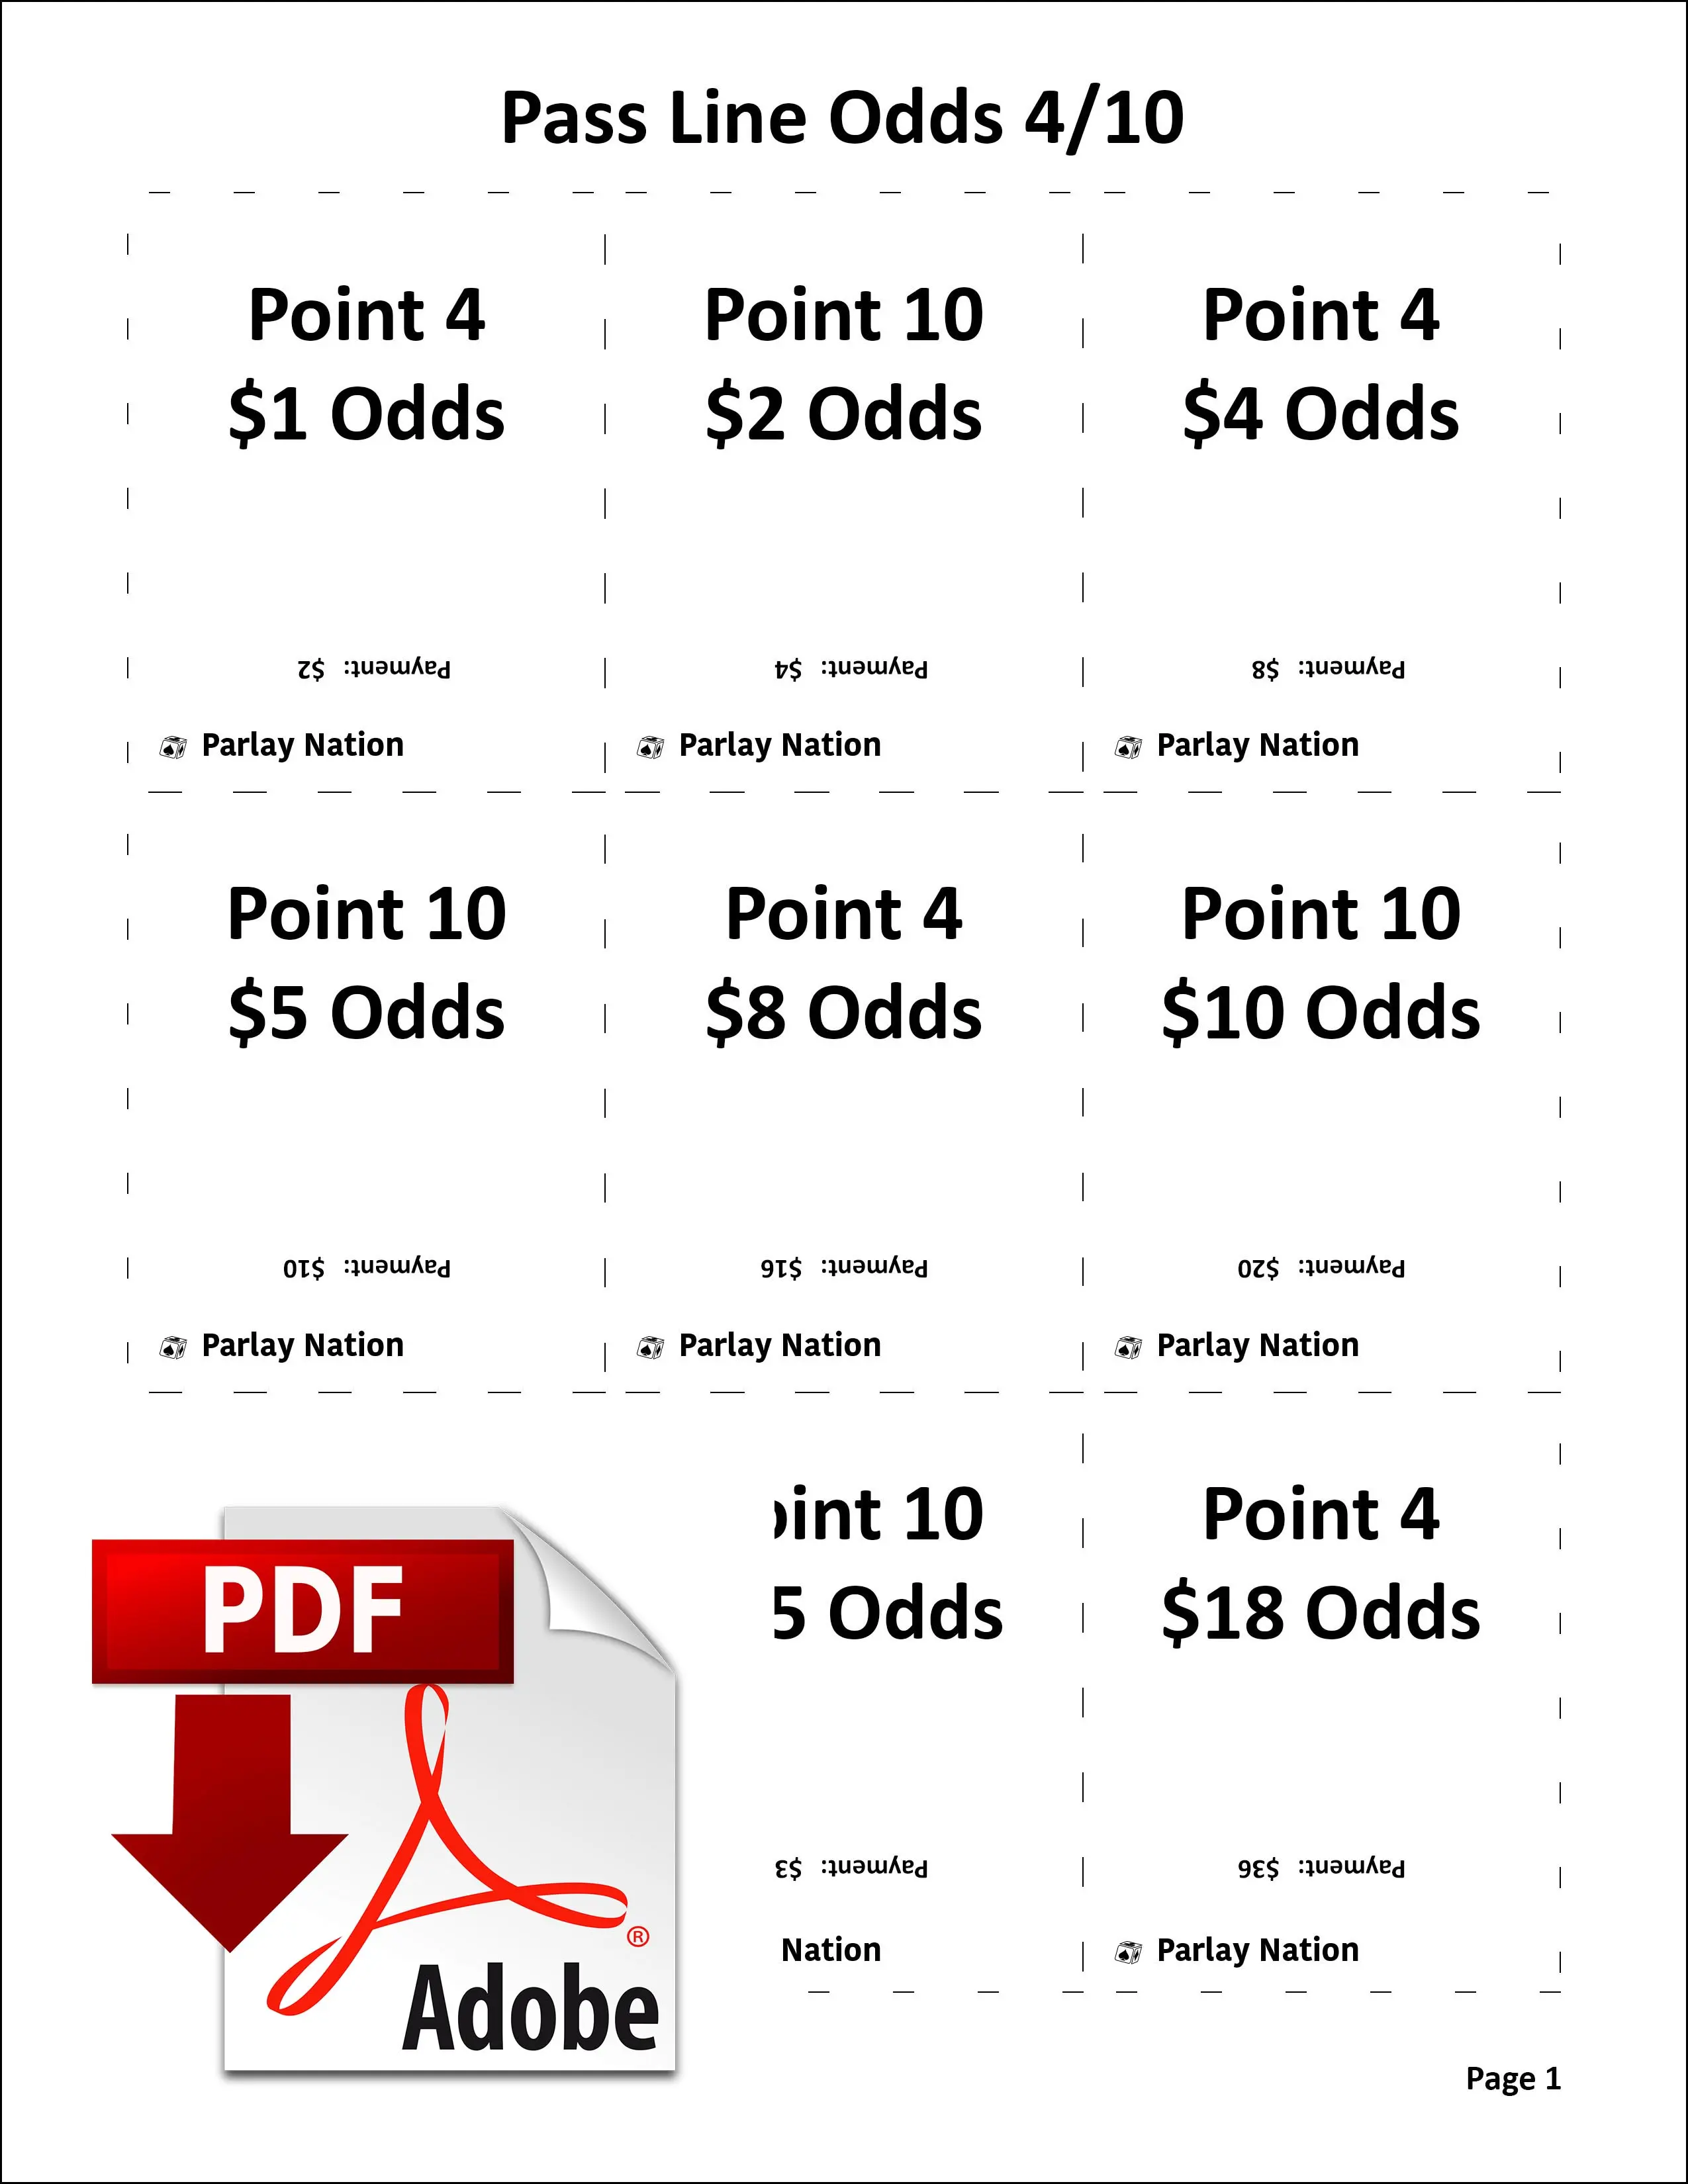 Pass Line Odds Payments 4 & 10 cover sheet.